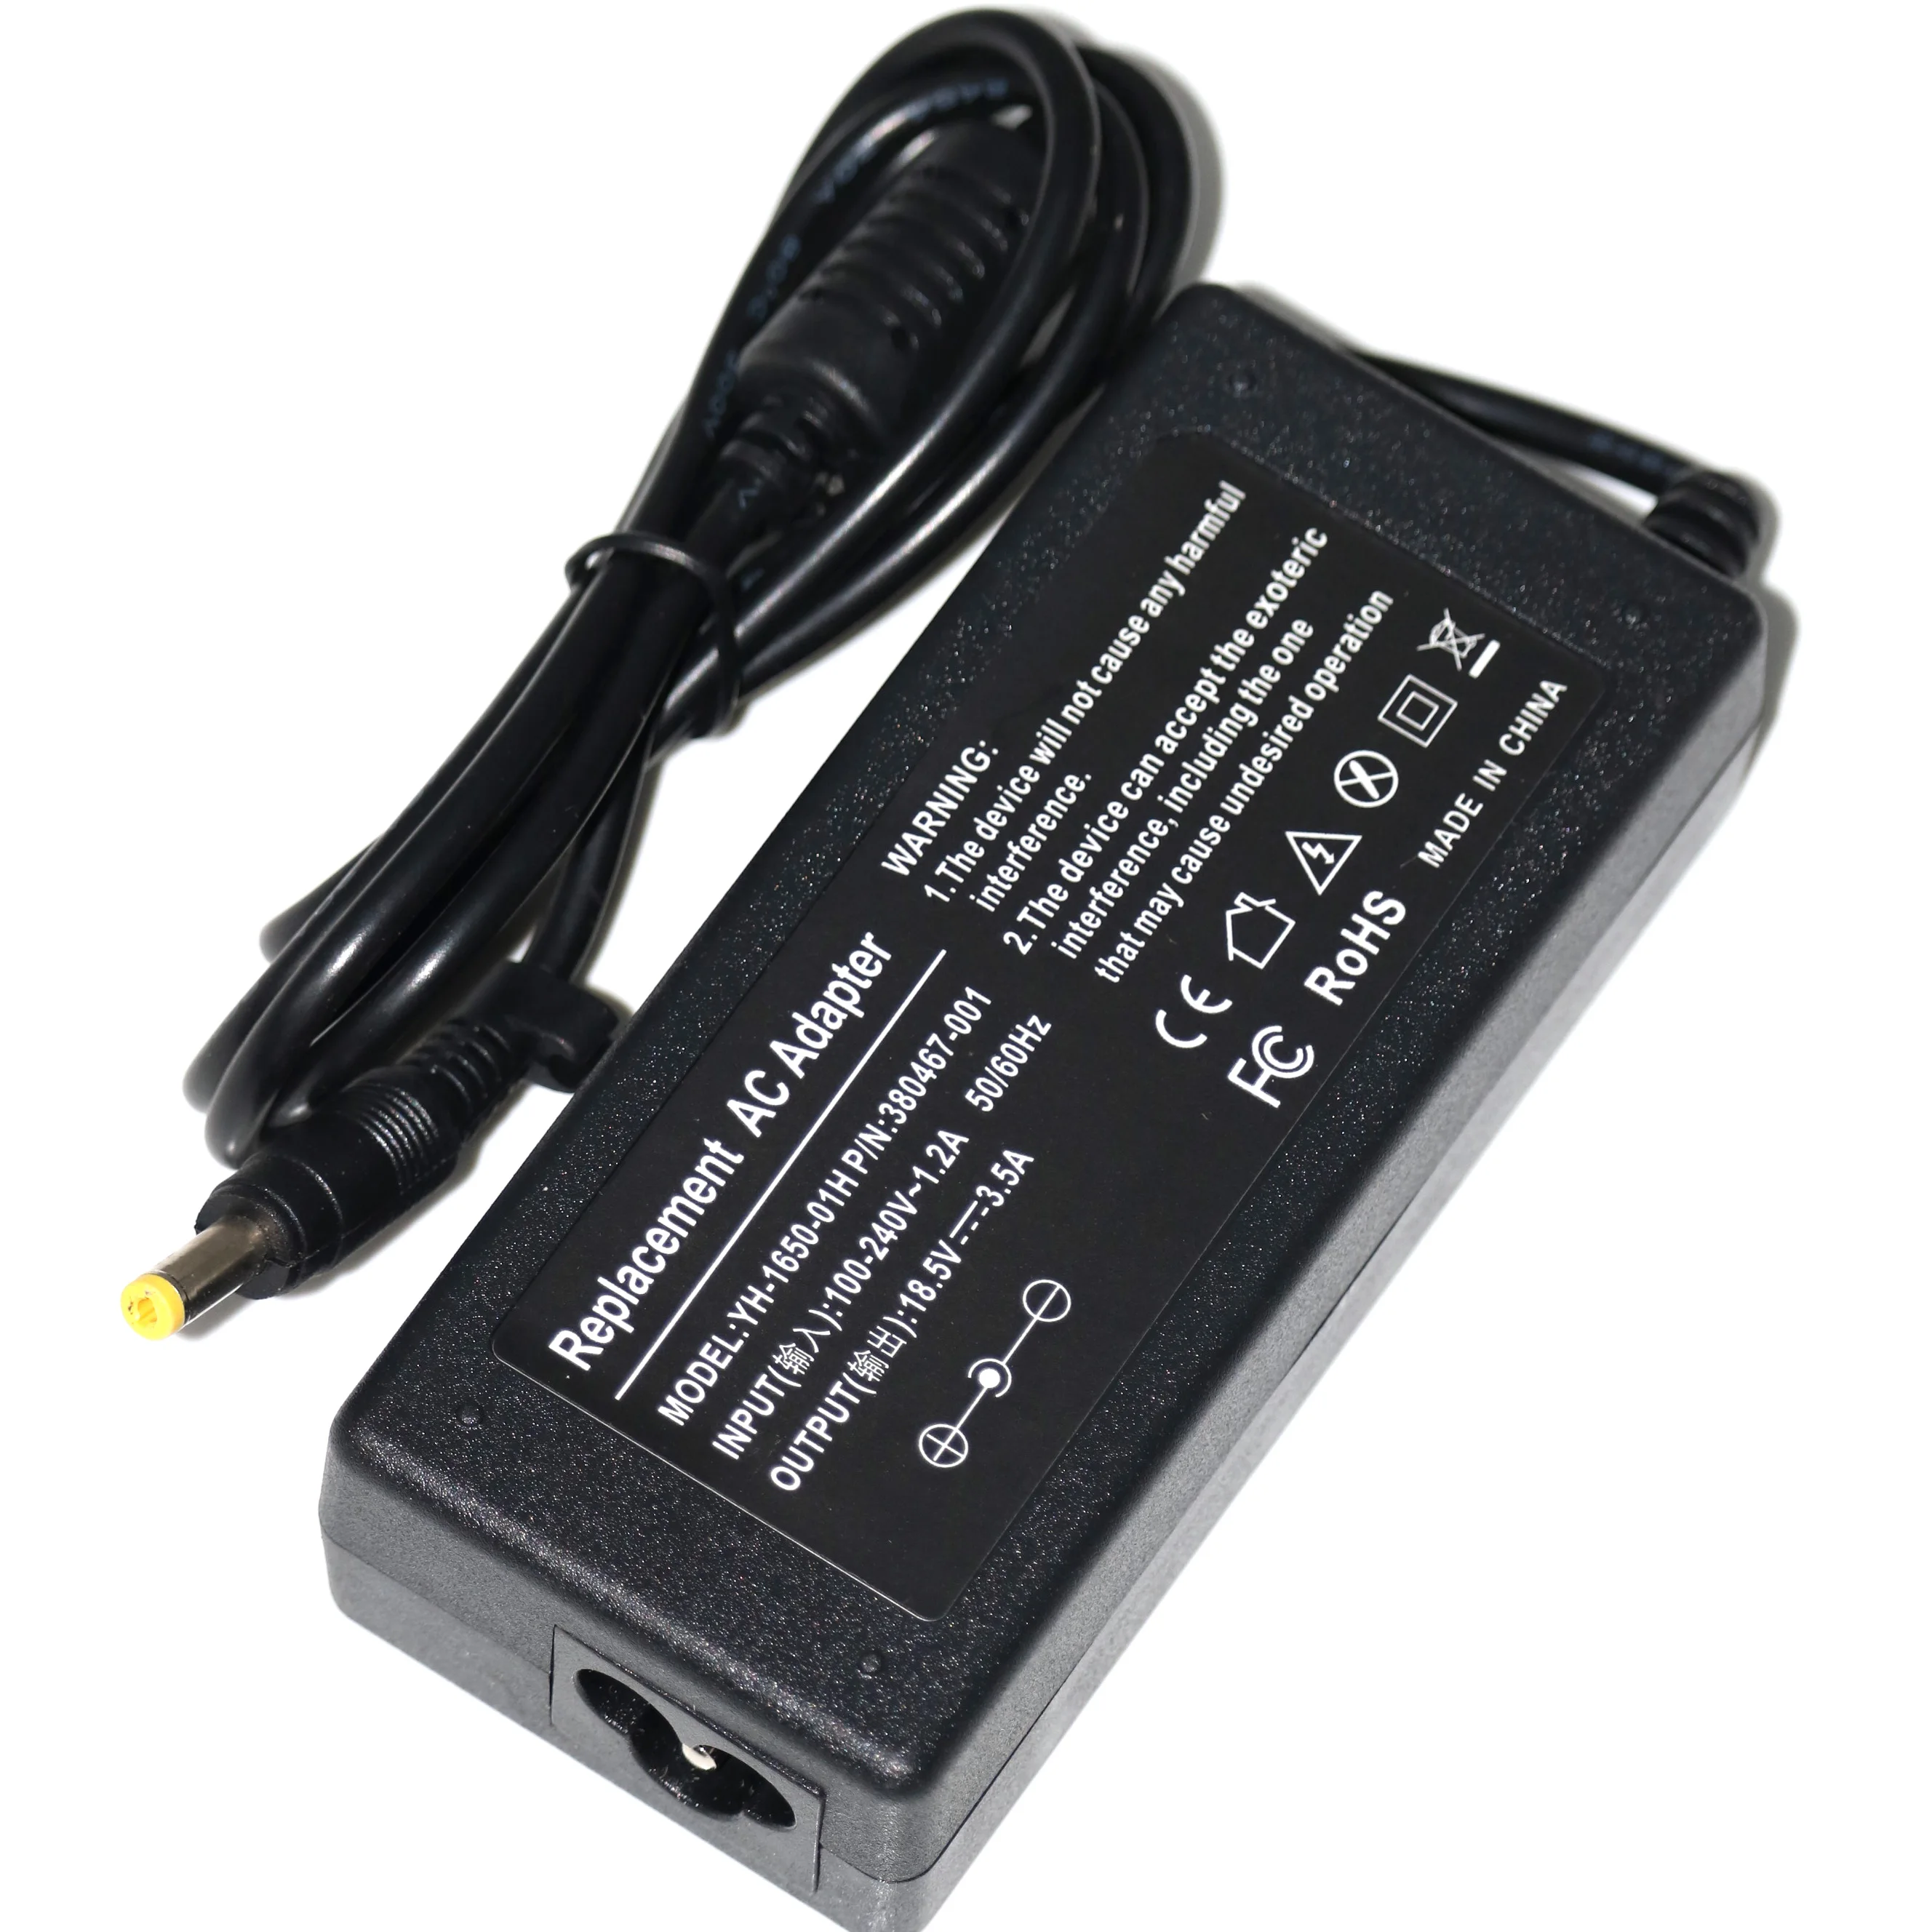 

18.5V 3.5A 4.8*1.7mm 65W Laptop Charger For HP Compaq Presario C300 C500 C700 Power Adapter 18.5V3.5A